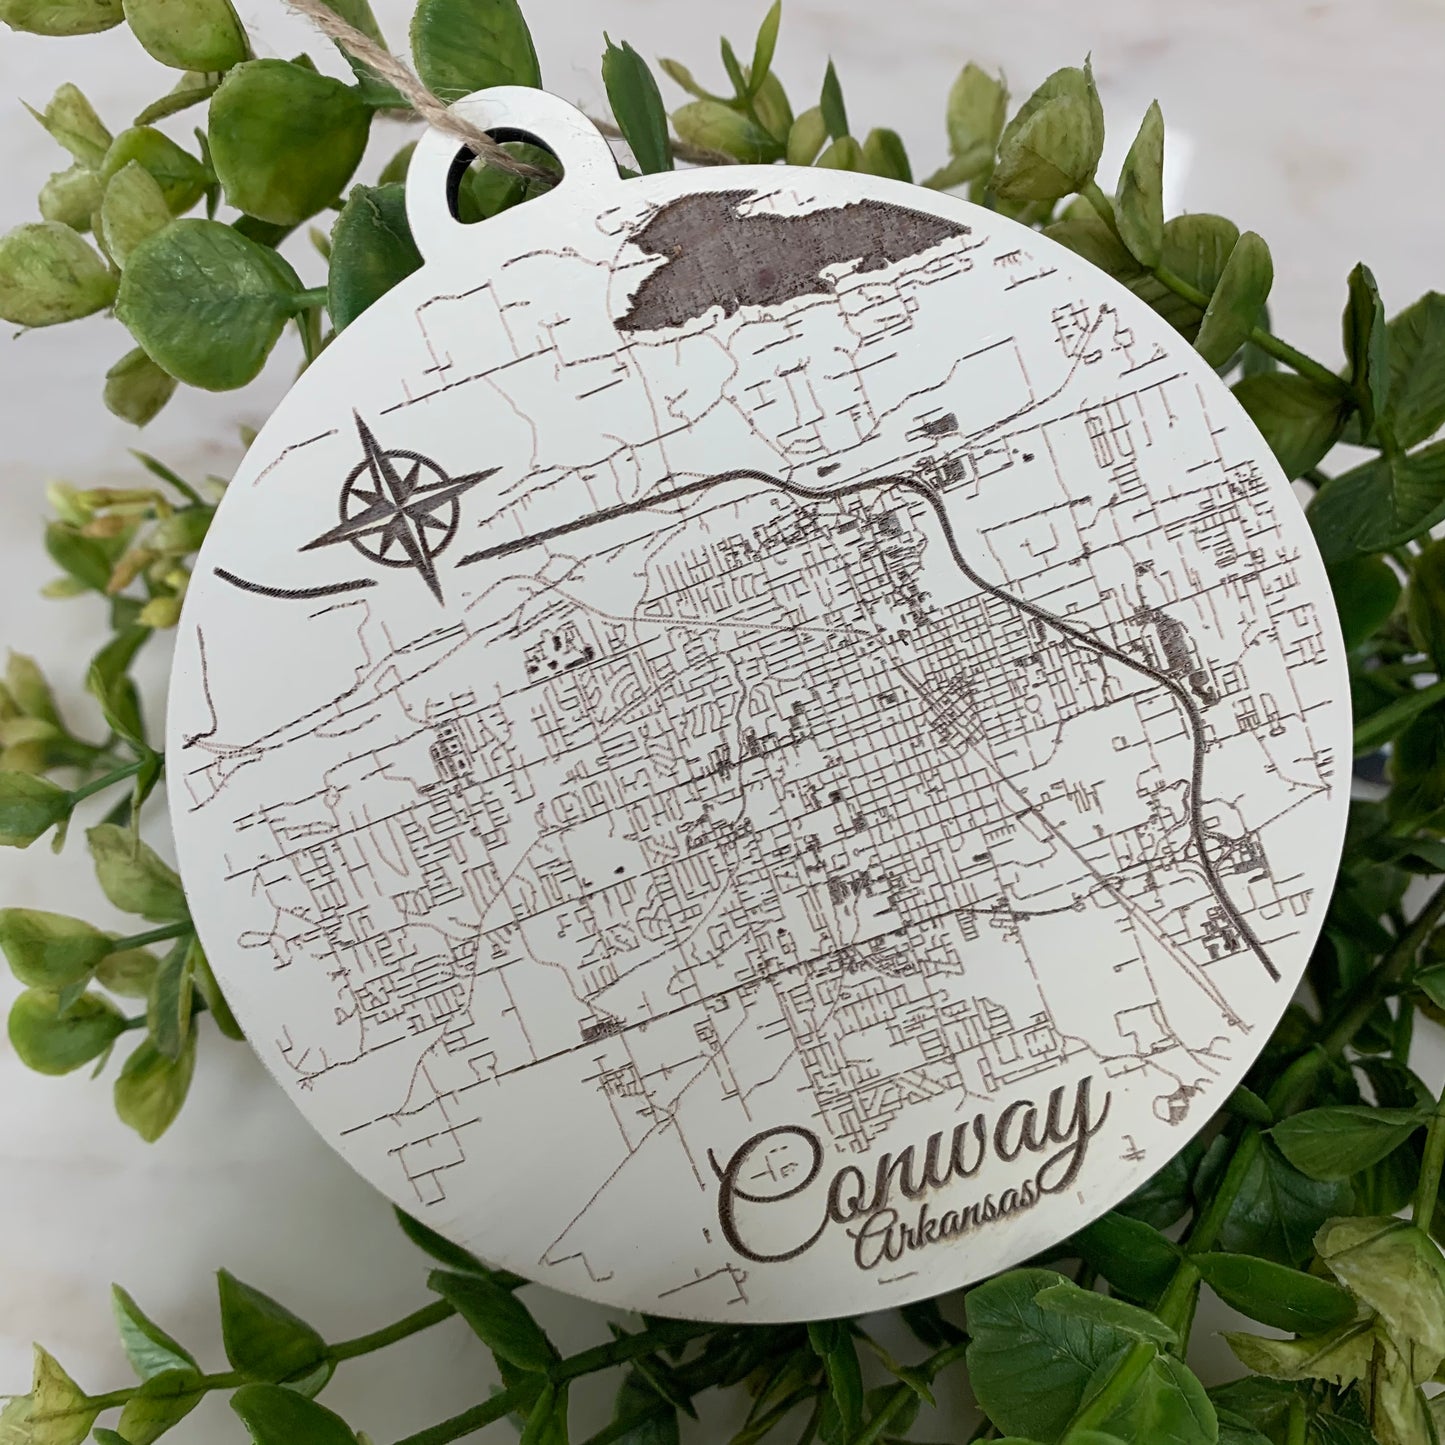 the burnt wood map ornament of conway displayed with greenery on a white background